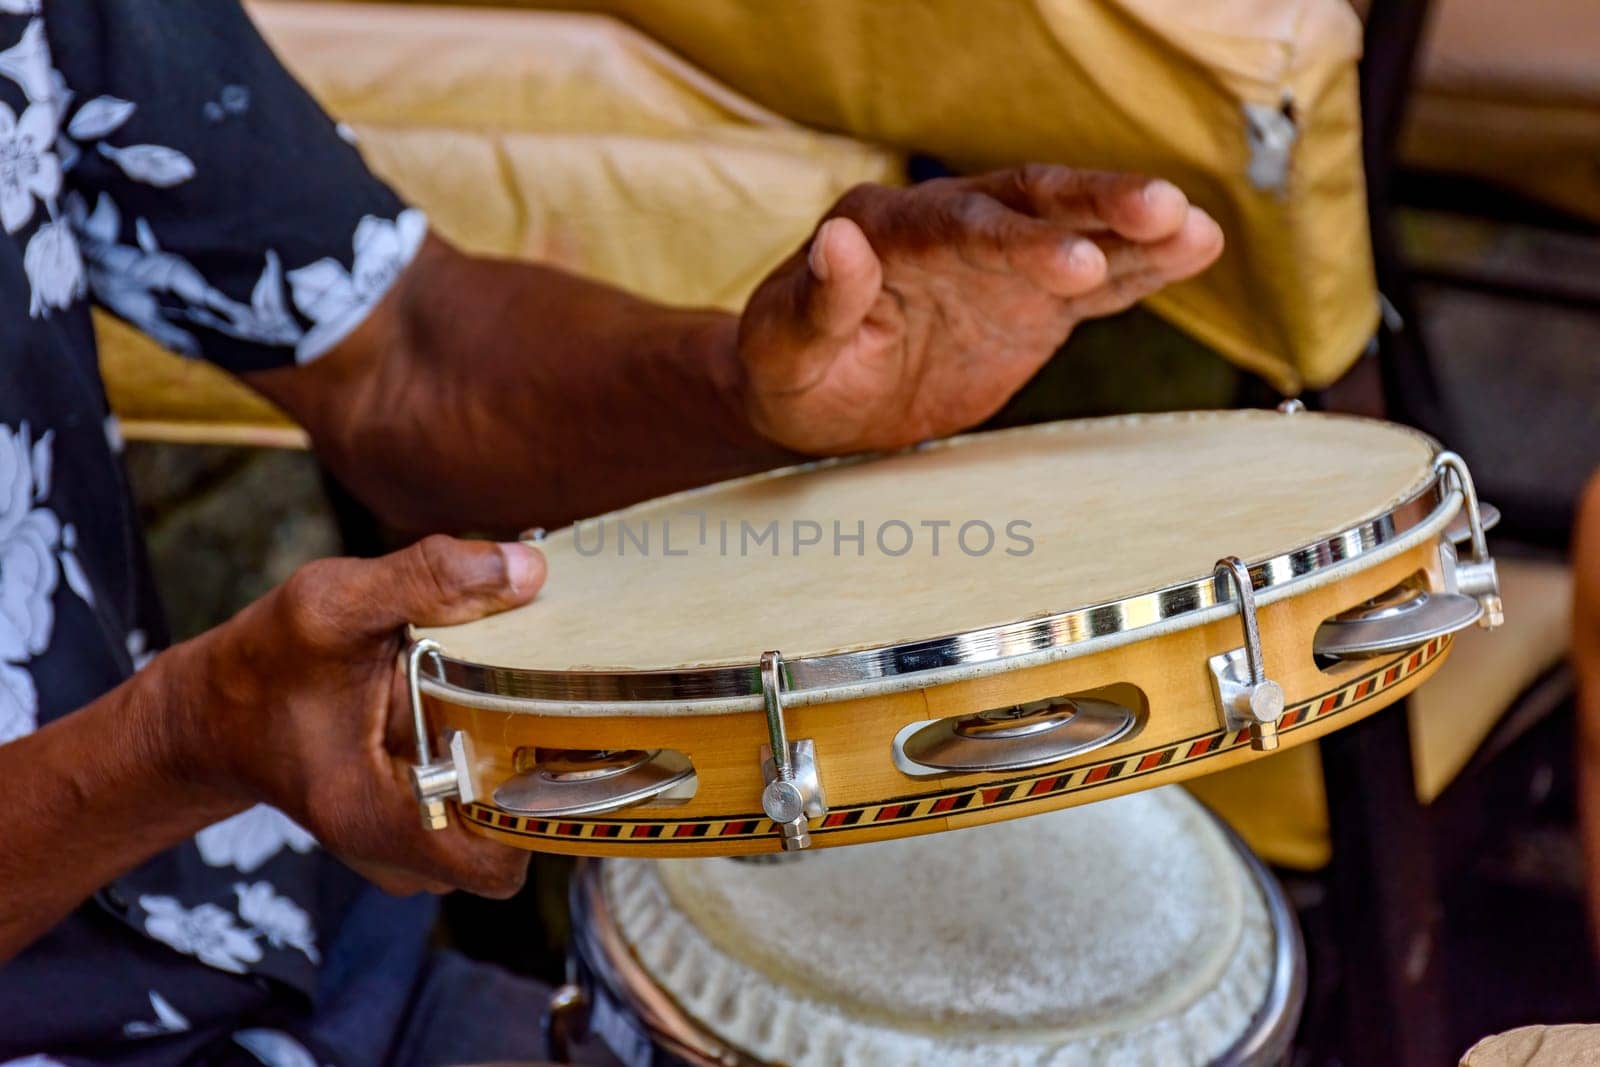 Hands and instrument of musician playing tambourine by Fred_Pinheiro